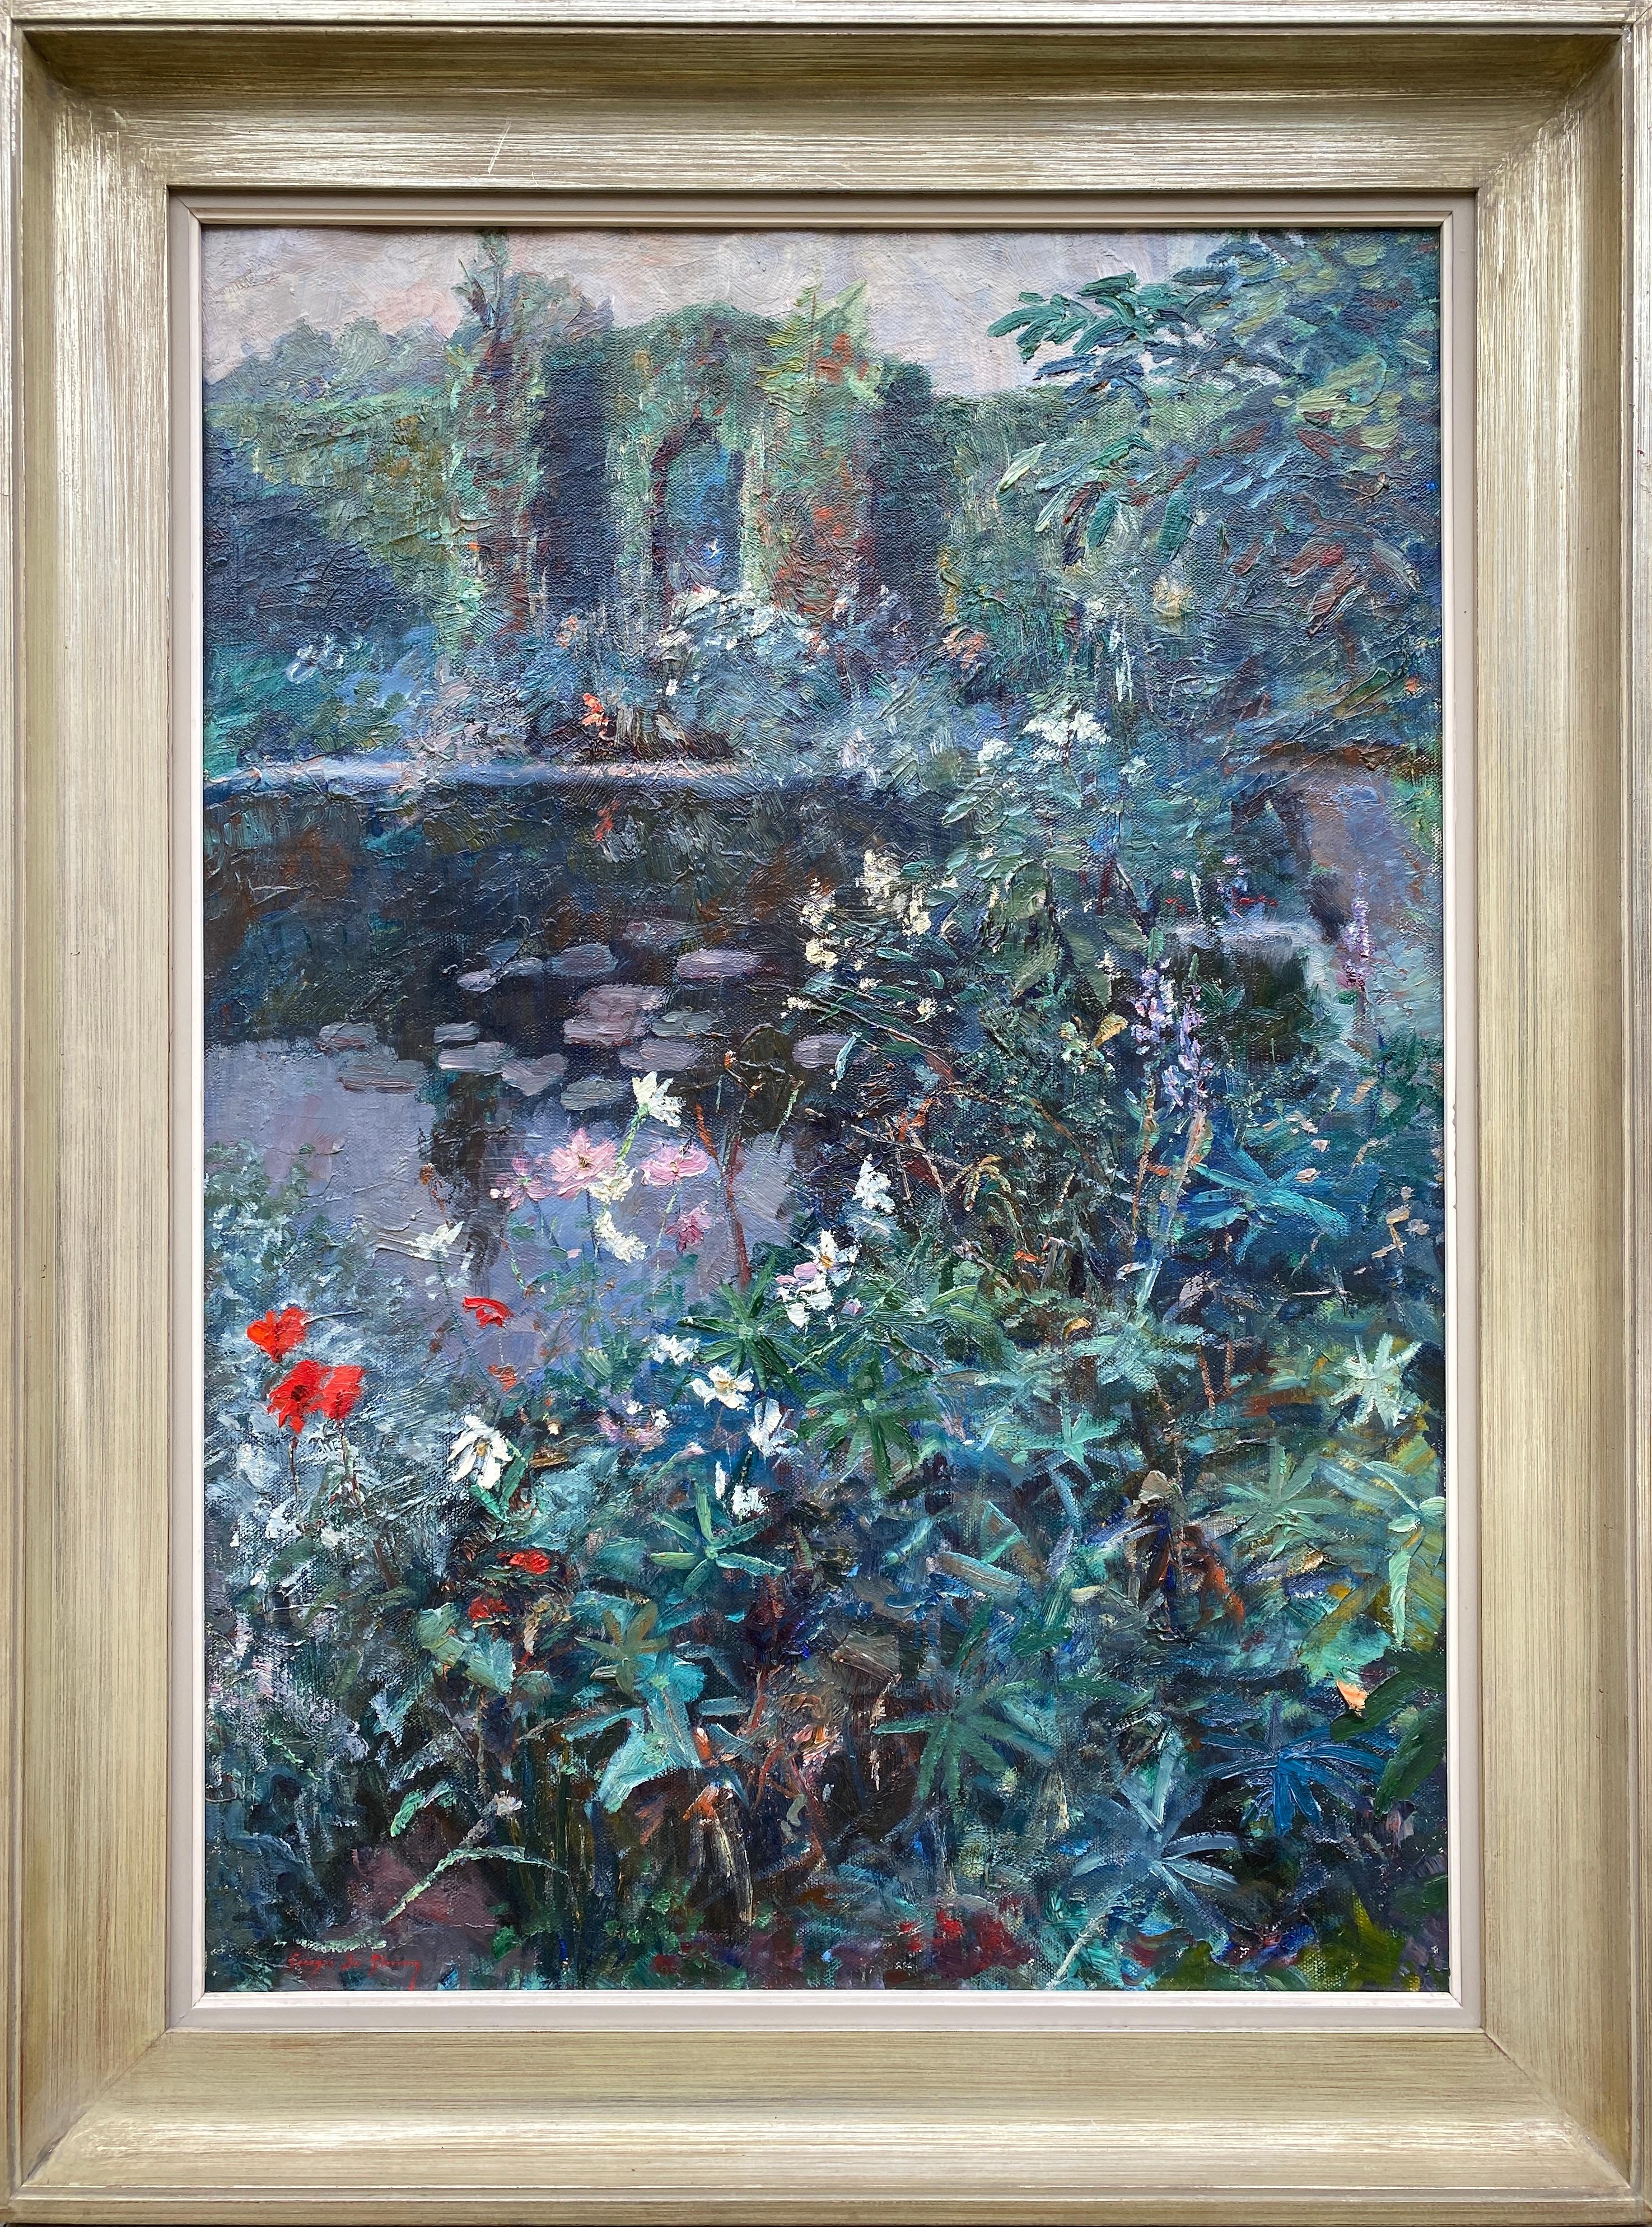 "Ruins in the Garden of Flowers"
by De Sloovere Georges

Bruges, Belgium 1873 – 1970
Bruges School
Signature: Signed bottom left

Medium: Oil on canvas
Dimensions: Image size 92 x 66 cm, frame size 108,50 x 92 cm

Biography: De Sloovere Georges